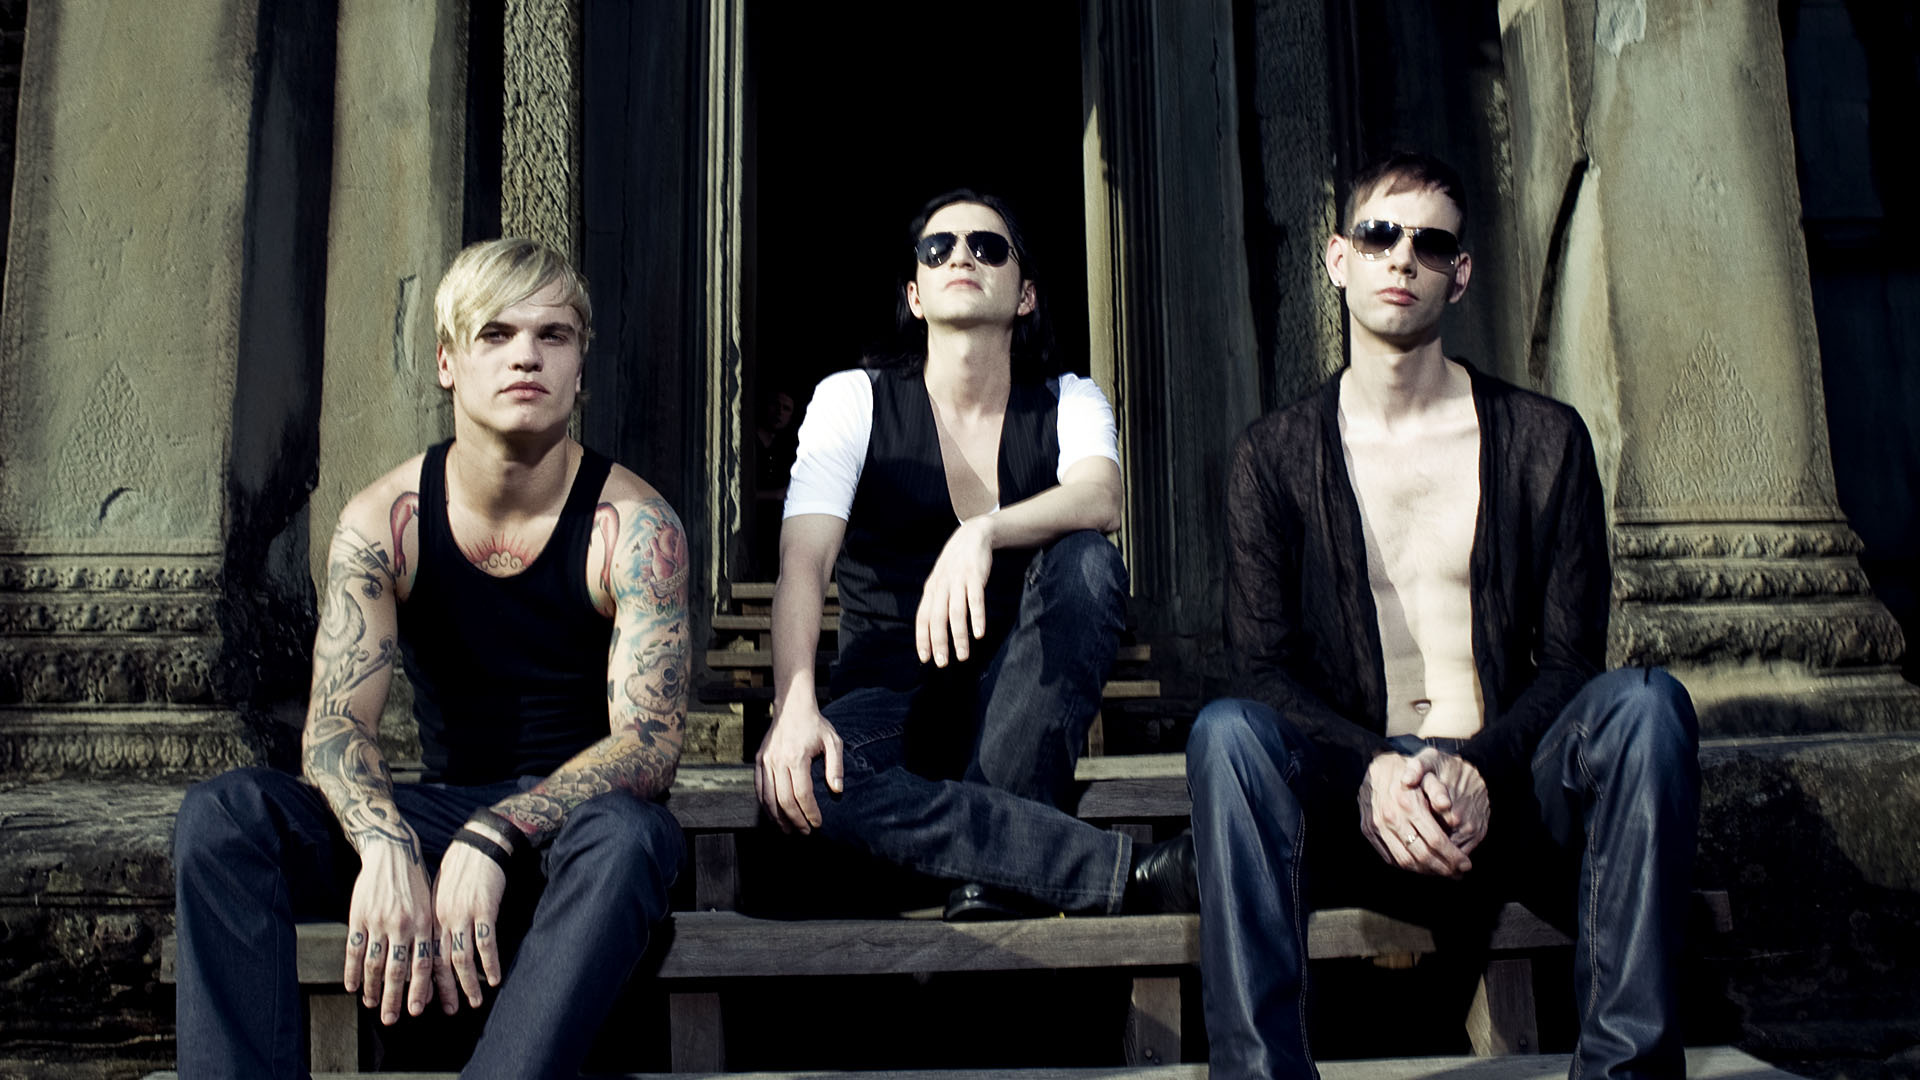 Placebo: The rock band famous for their unique sound and angst-fueled musical content. 1920x1080 Full HD Background.